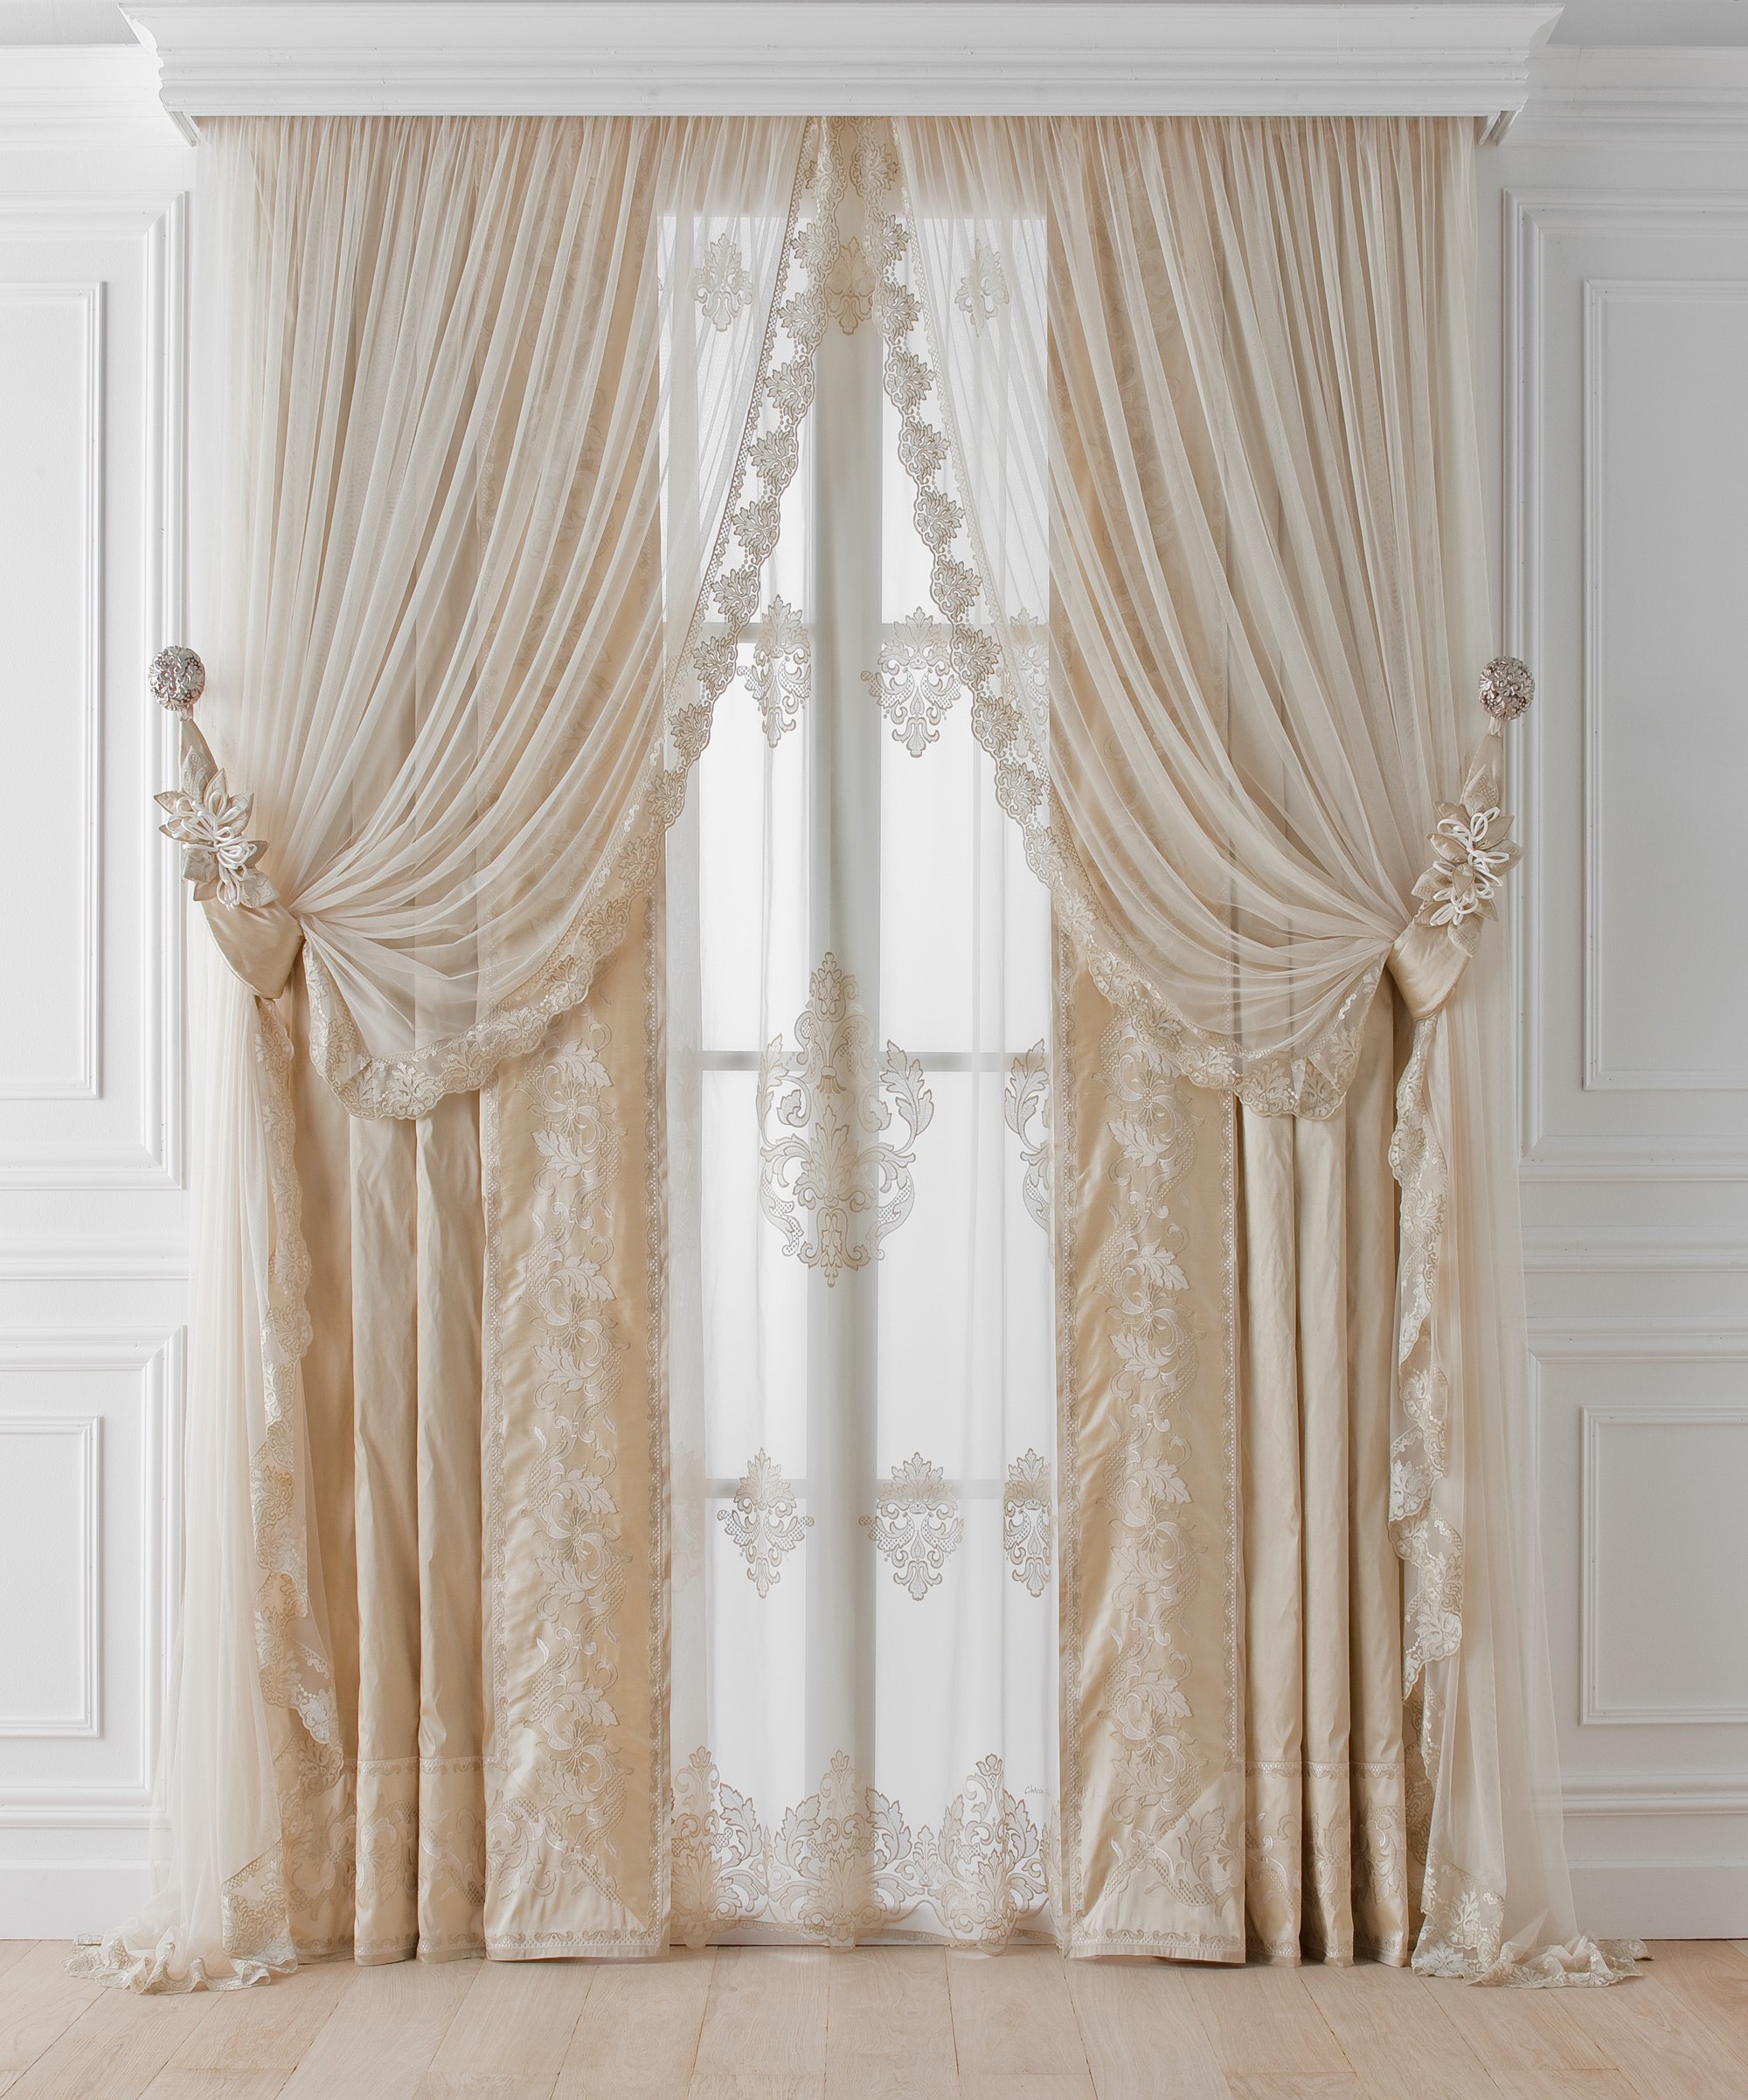 Custom Window Treatments Hand made draperies from our Masterpiece Collection. 40